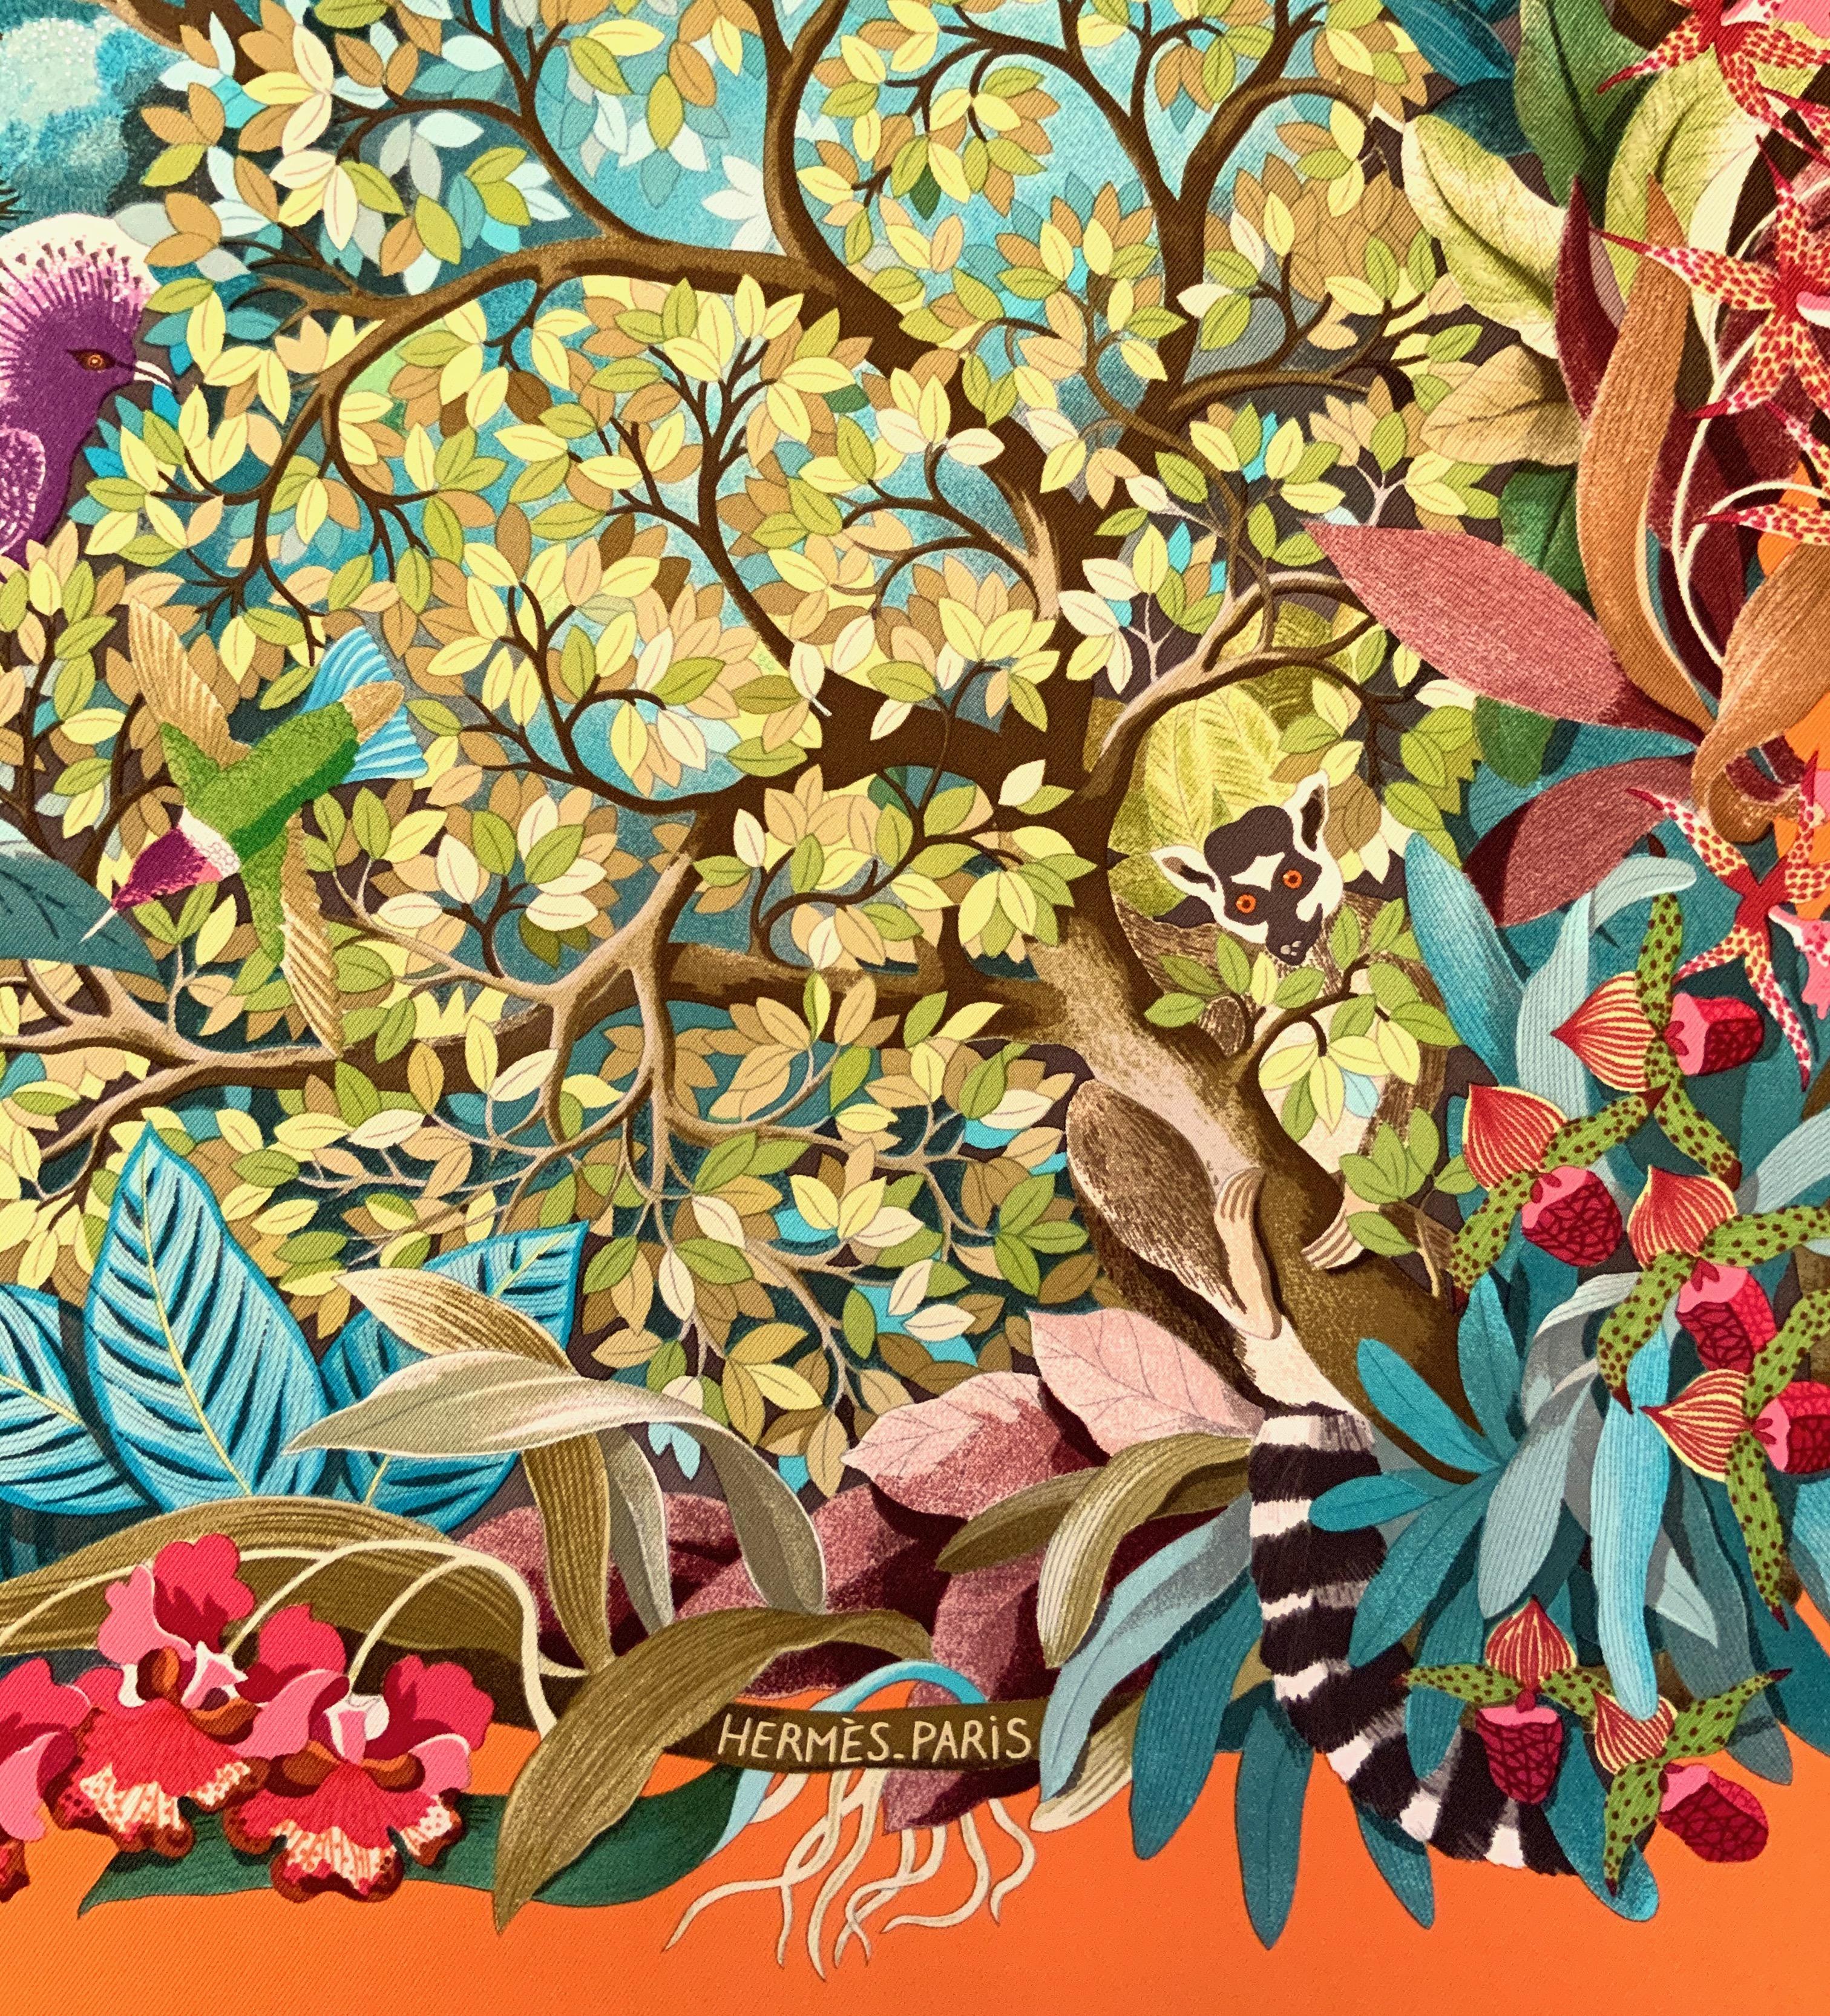 Designed in 2007 by Aline Honoré, this pre-owned but recent Hermès silk scarf is in excellent condition.
The scarf has a lively jungle scene with numerous animals surrounding a central sun on an orange background.

Fabric: 100% silk
Color: